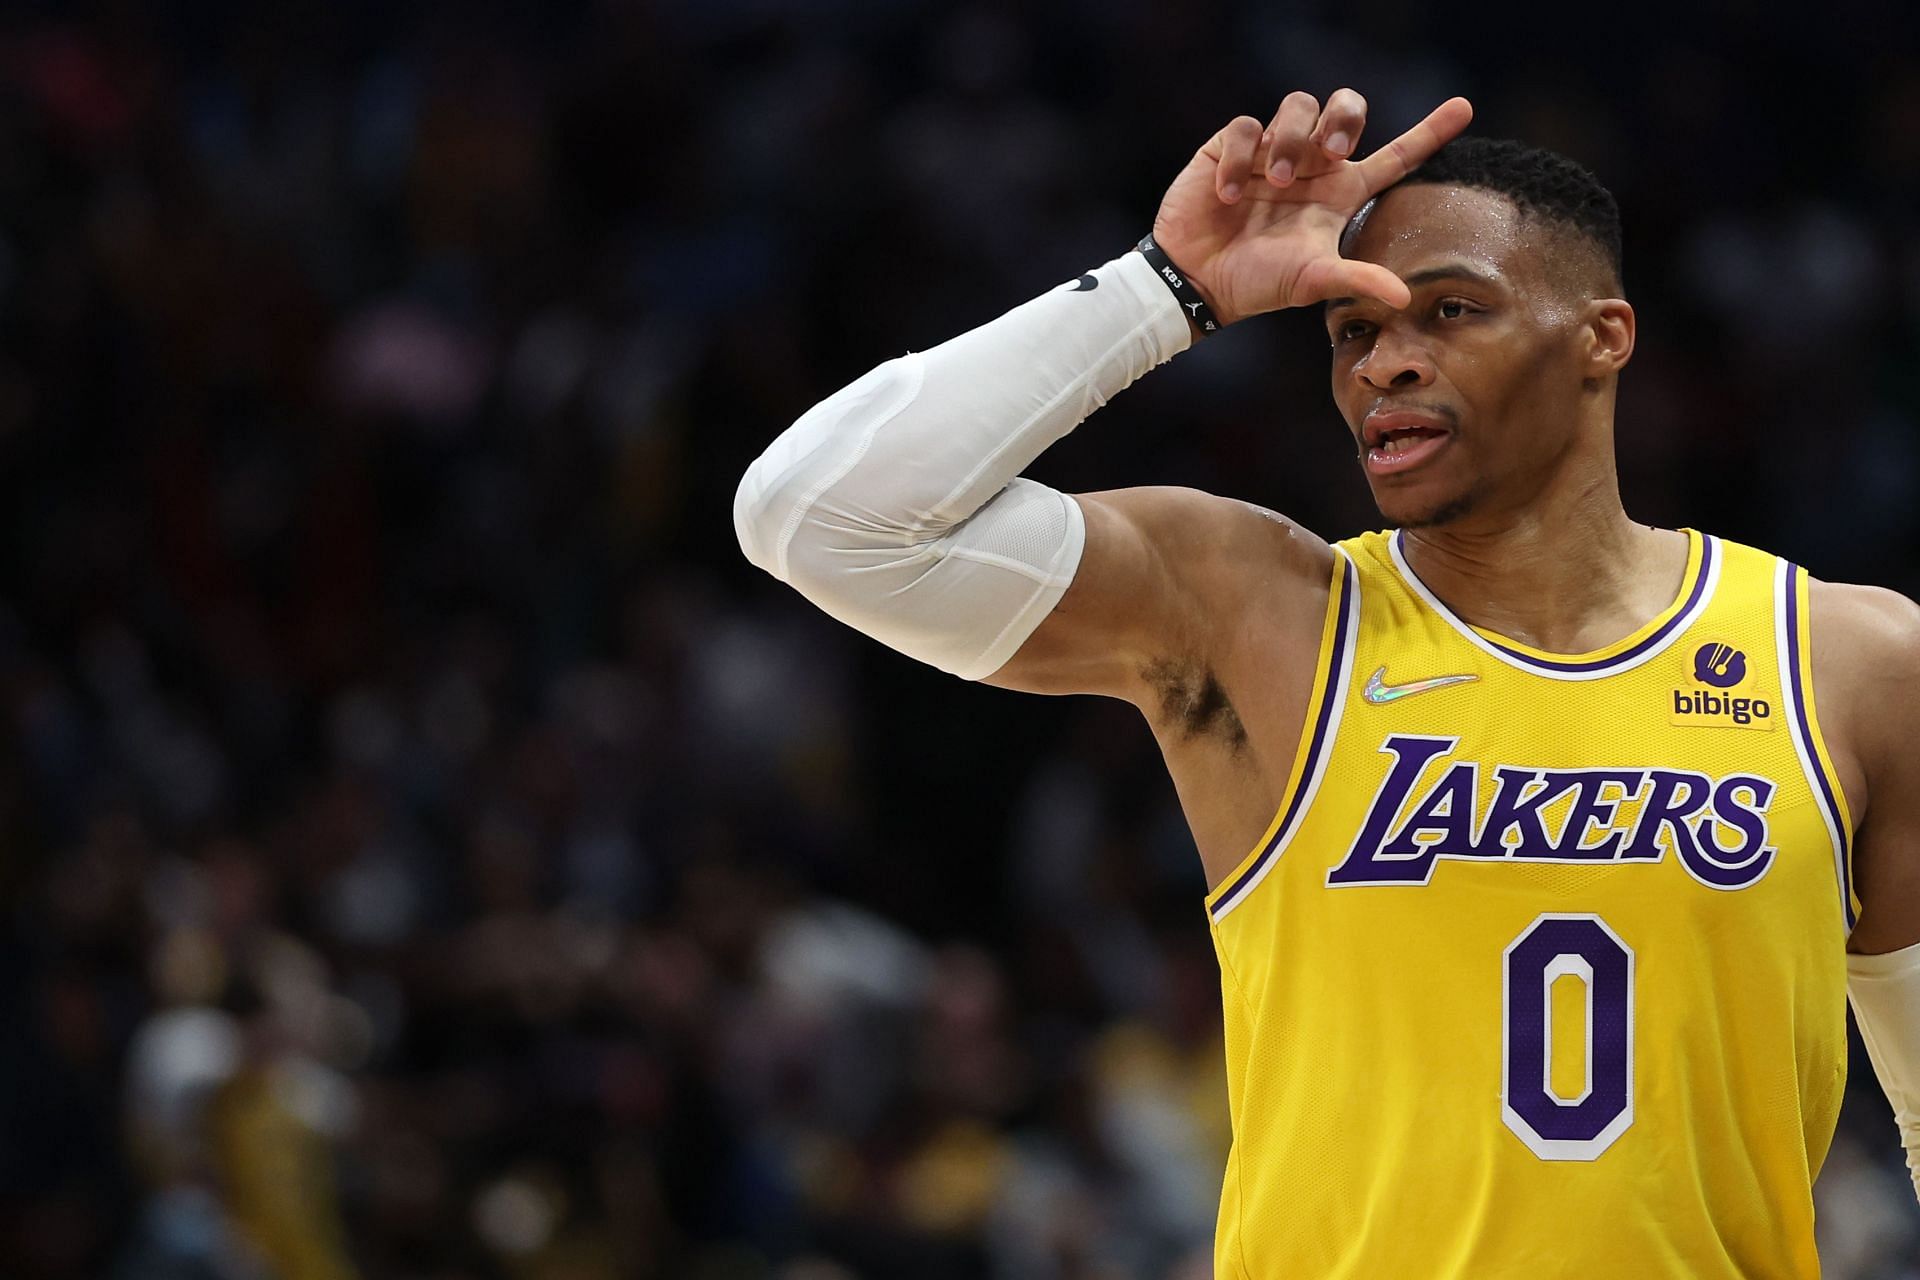 Russell Westbrook of the LA Lakers is a 9-time NBA All-Star.